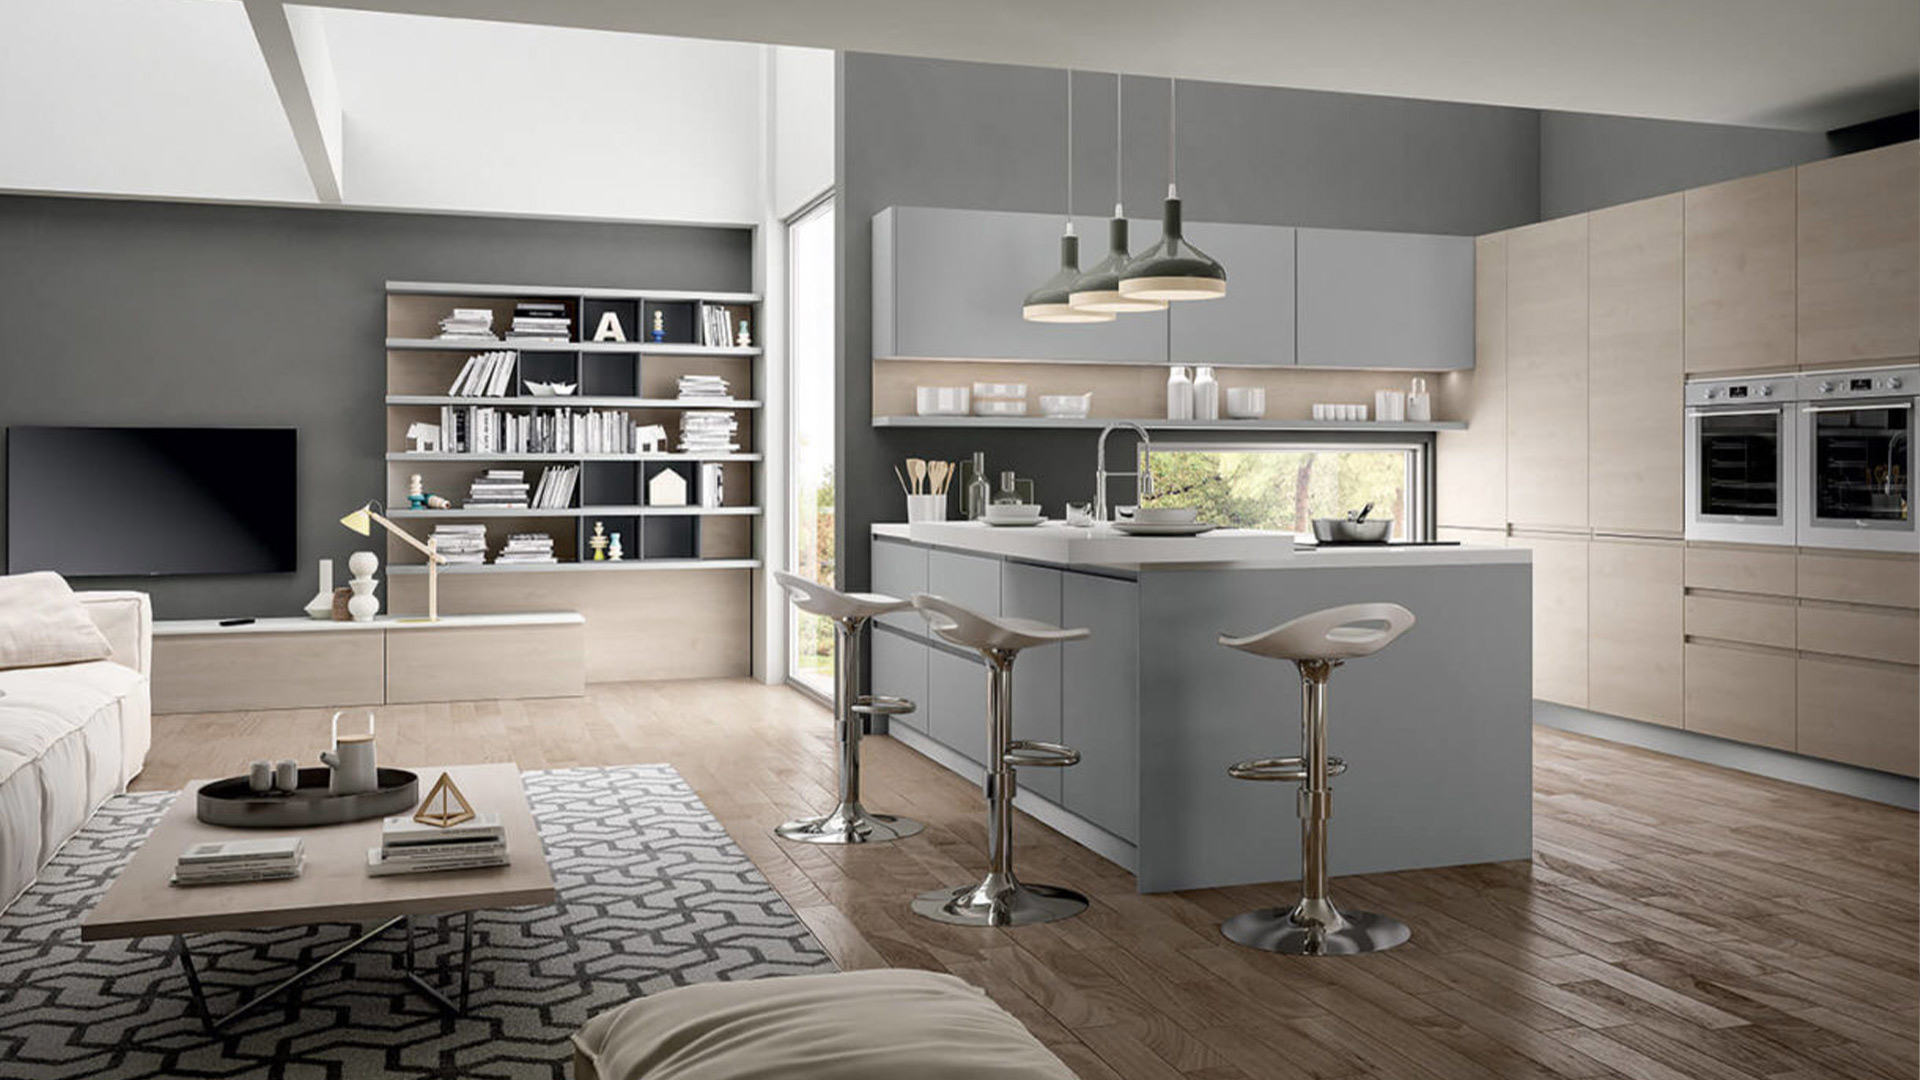 Blog IDW - The modern kitchens from Arredo3